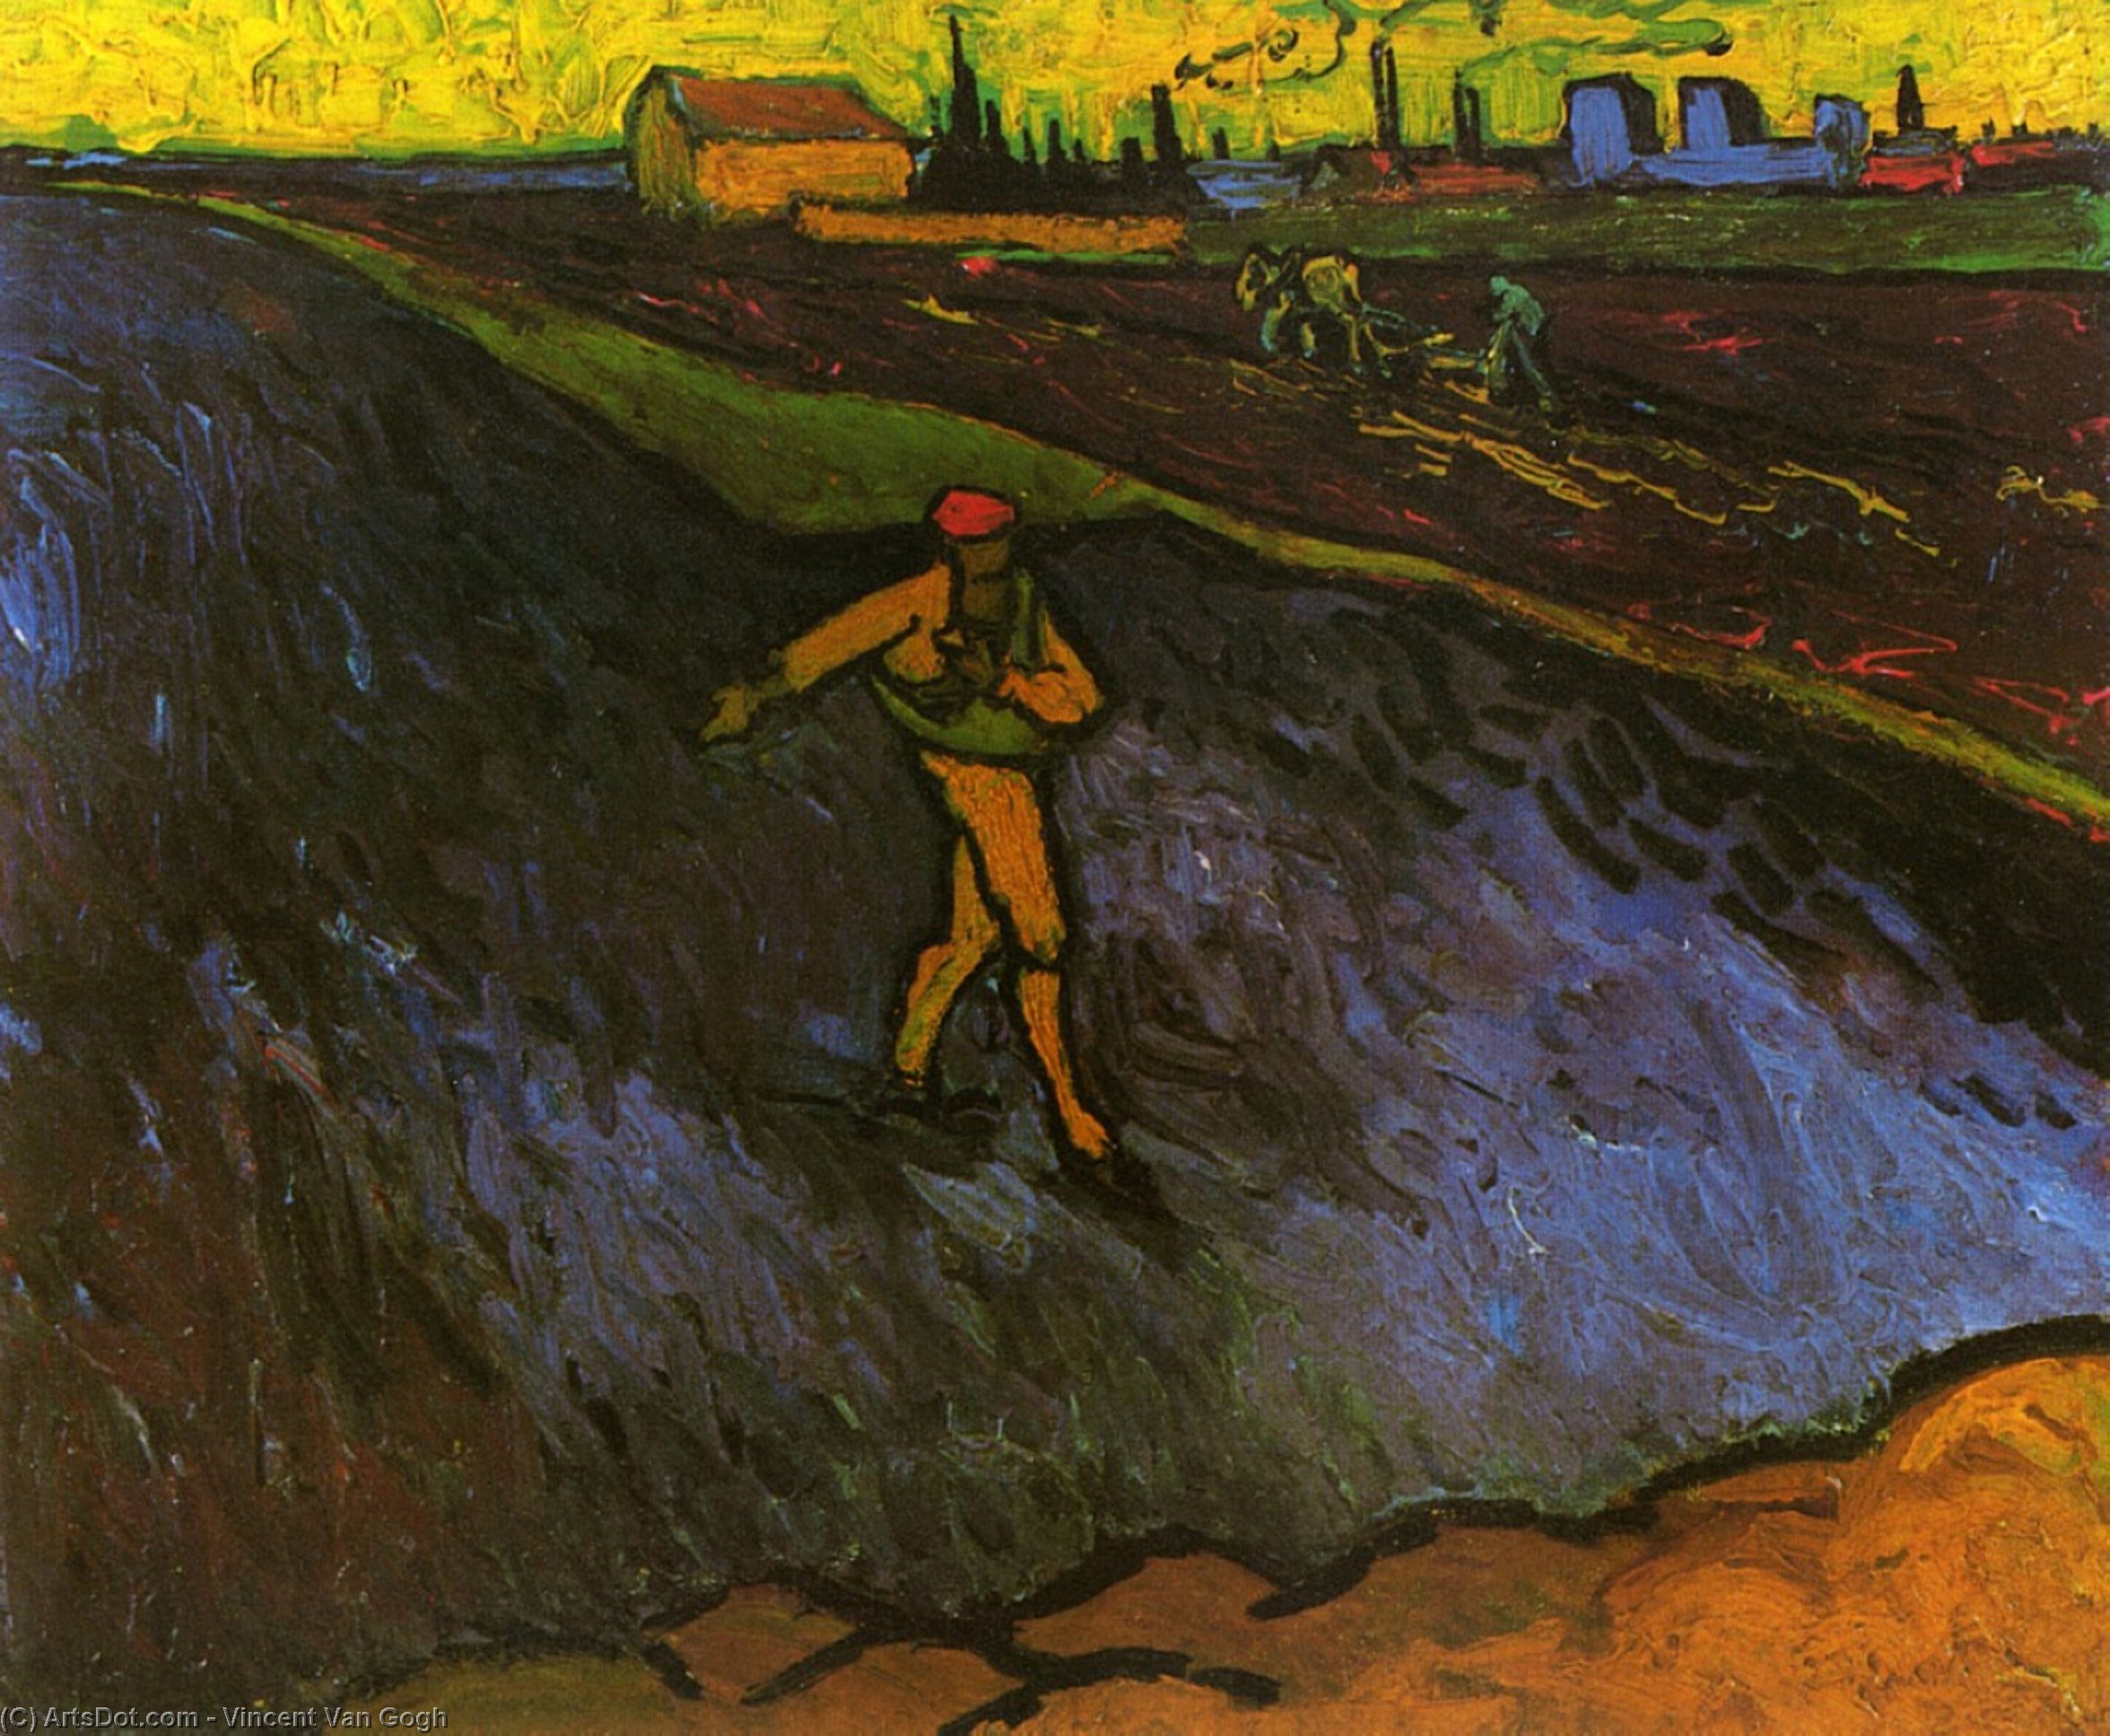 WikiOO.org - 백과 사전 - 회화, 삽화 Vincent Van Gogh - The Sower: Outskirts of Arles in the Background